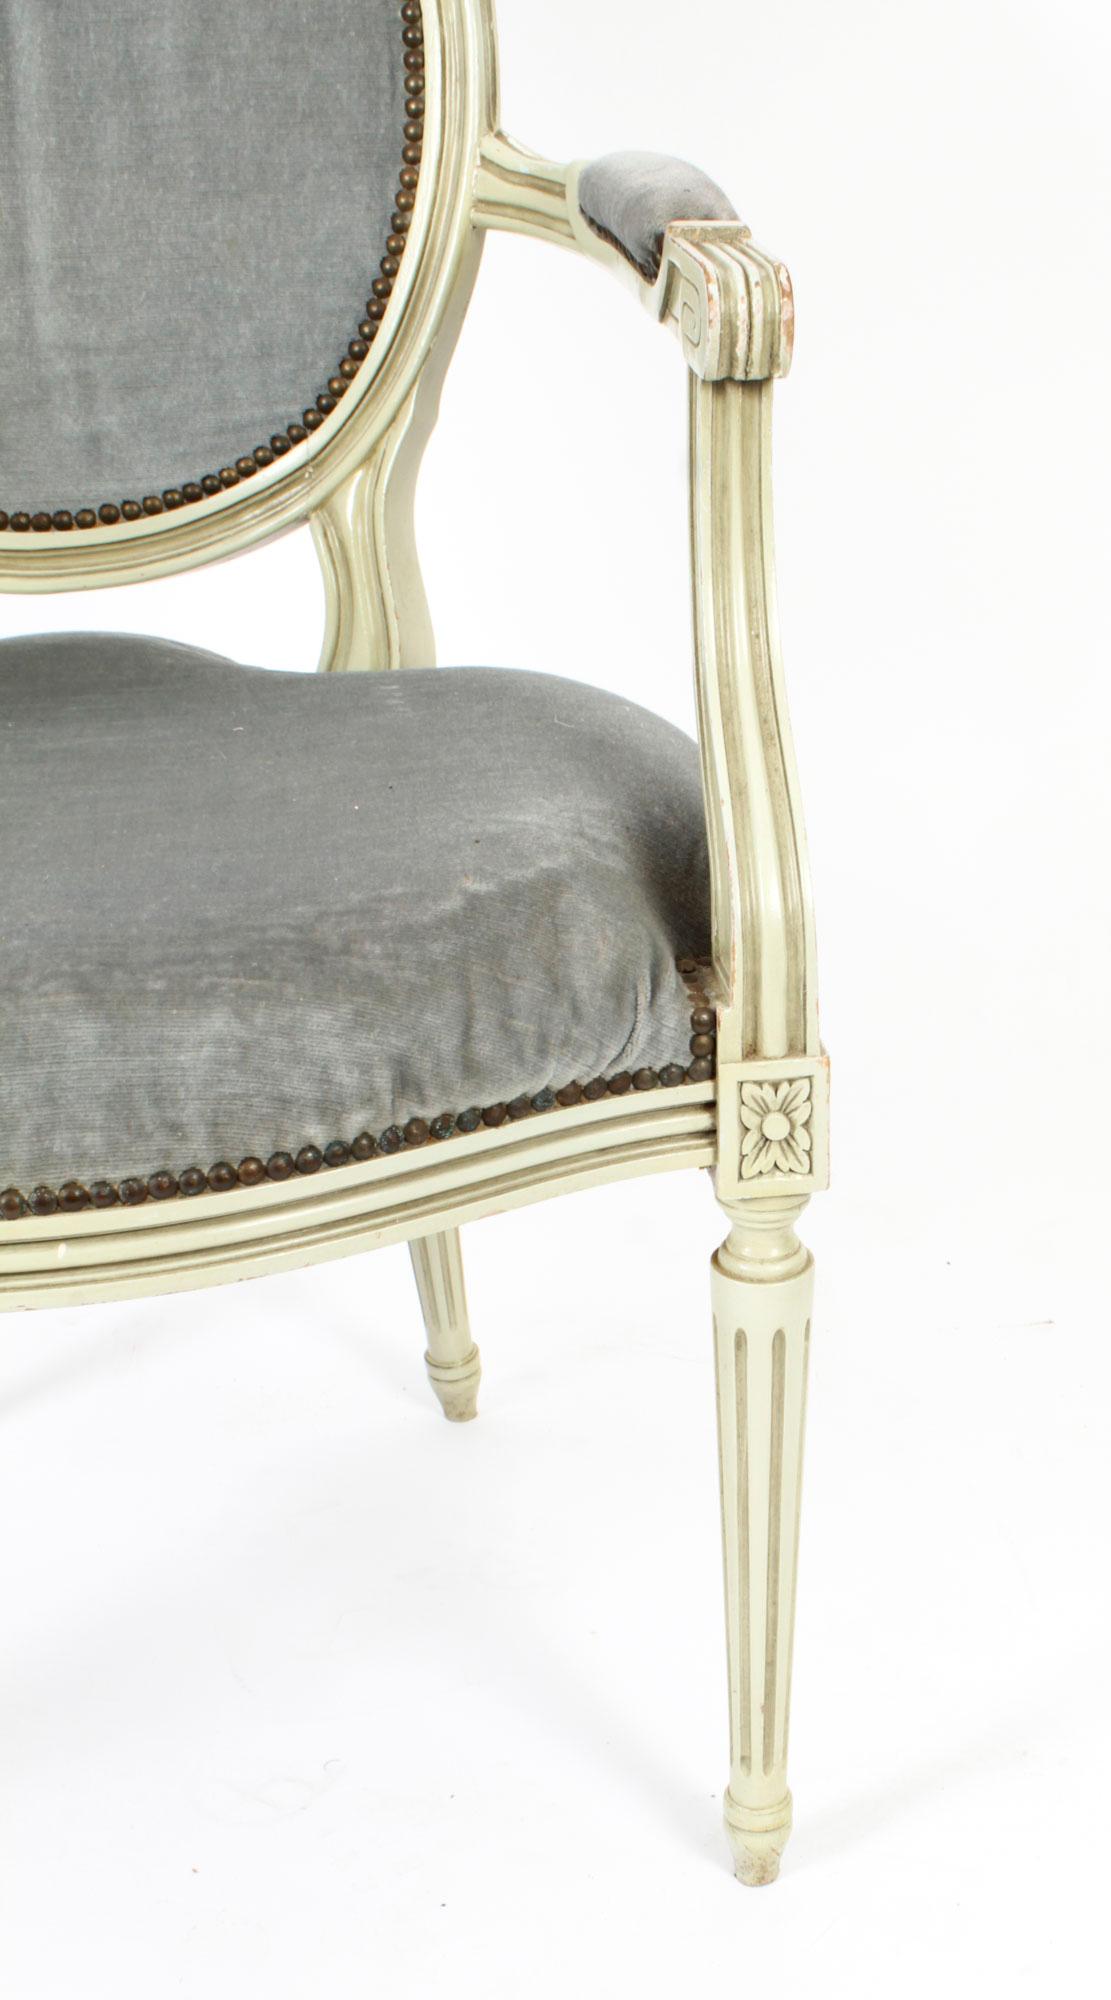 Antique Pair French Louis XVI Revival Painted Armchairs, Early 20th Century For Sale 2